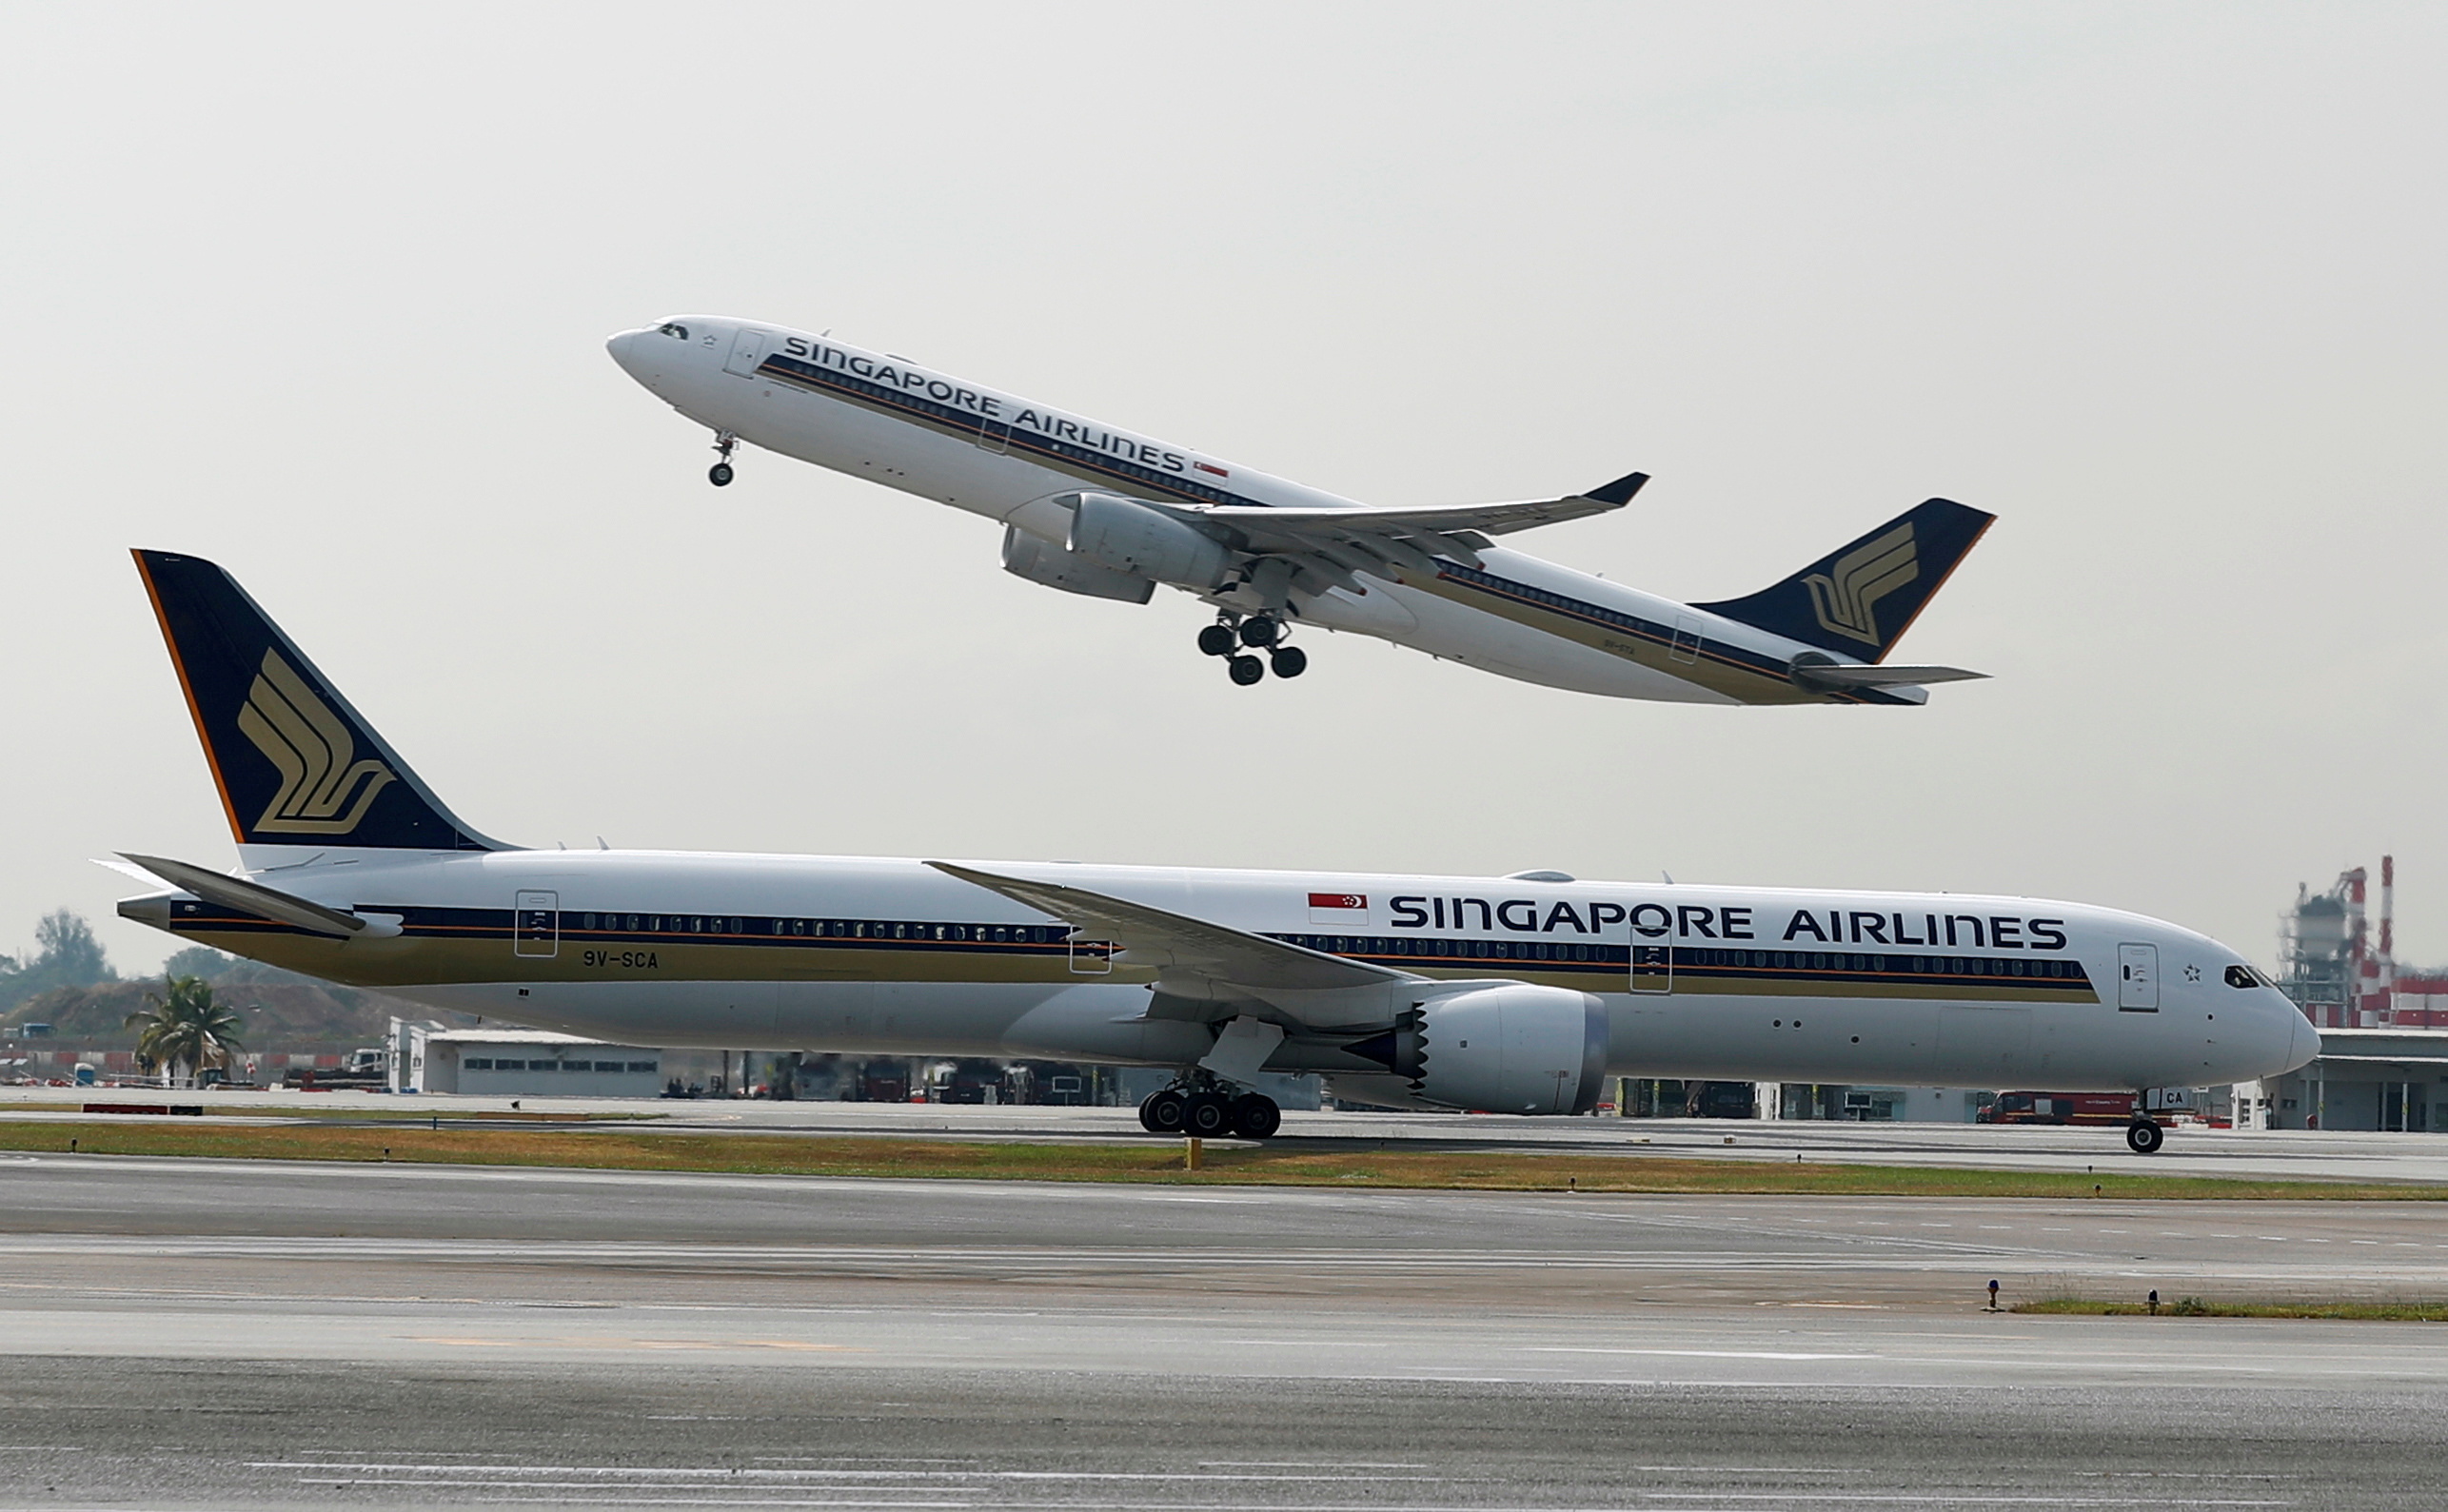  A Singapore Airlines Airbus A330-300 plane takes off behind a Boeing 787-10 Dreamliner at Changi Airport in Singapore March 28, 2018. REUTERS/Edgar Su/File Photo/File Photo